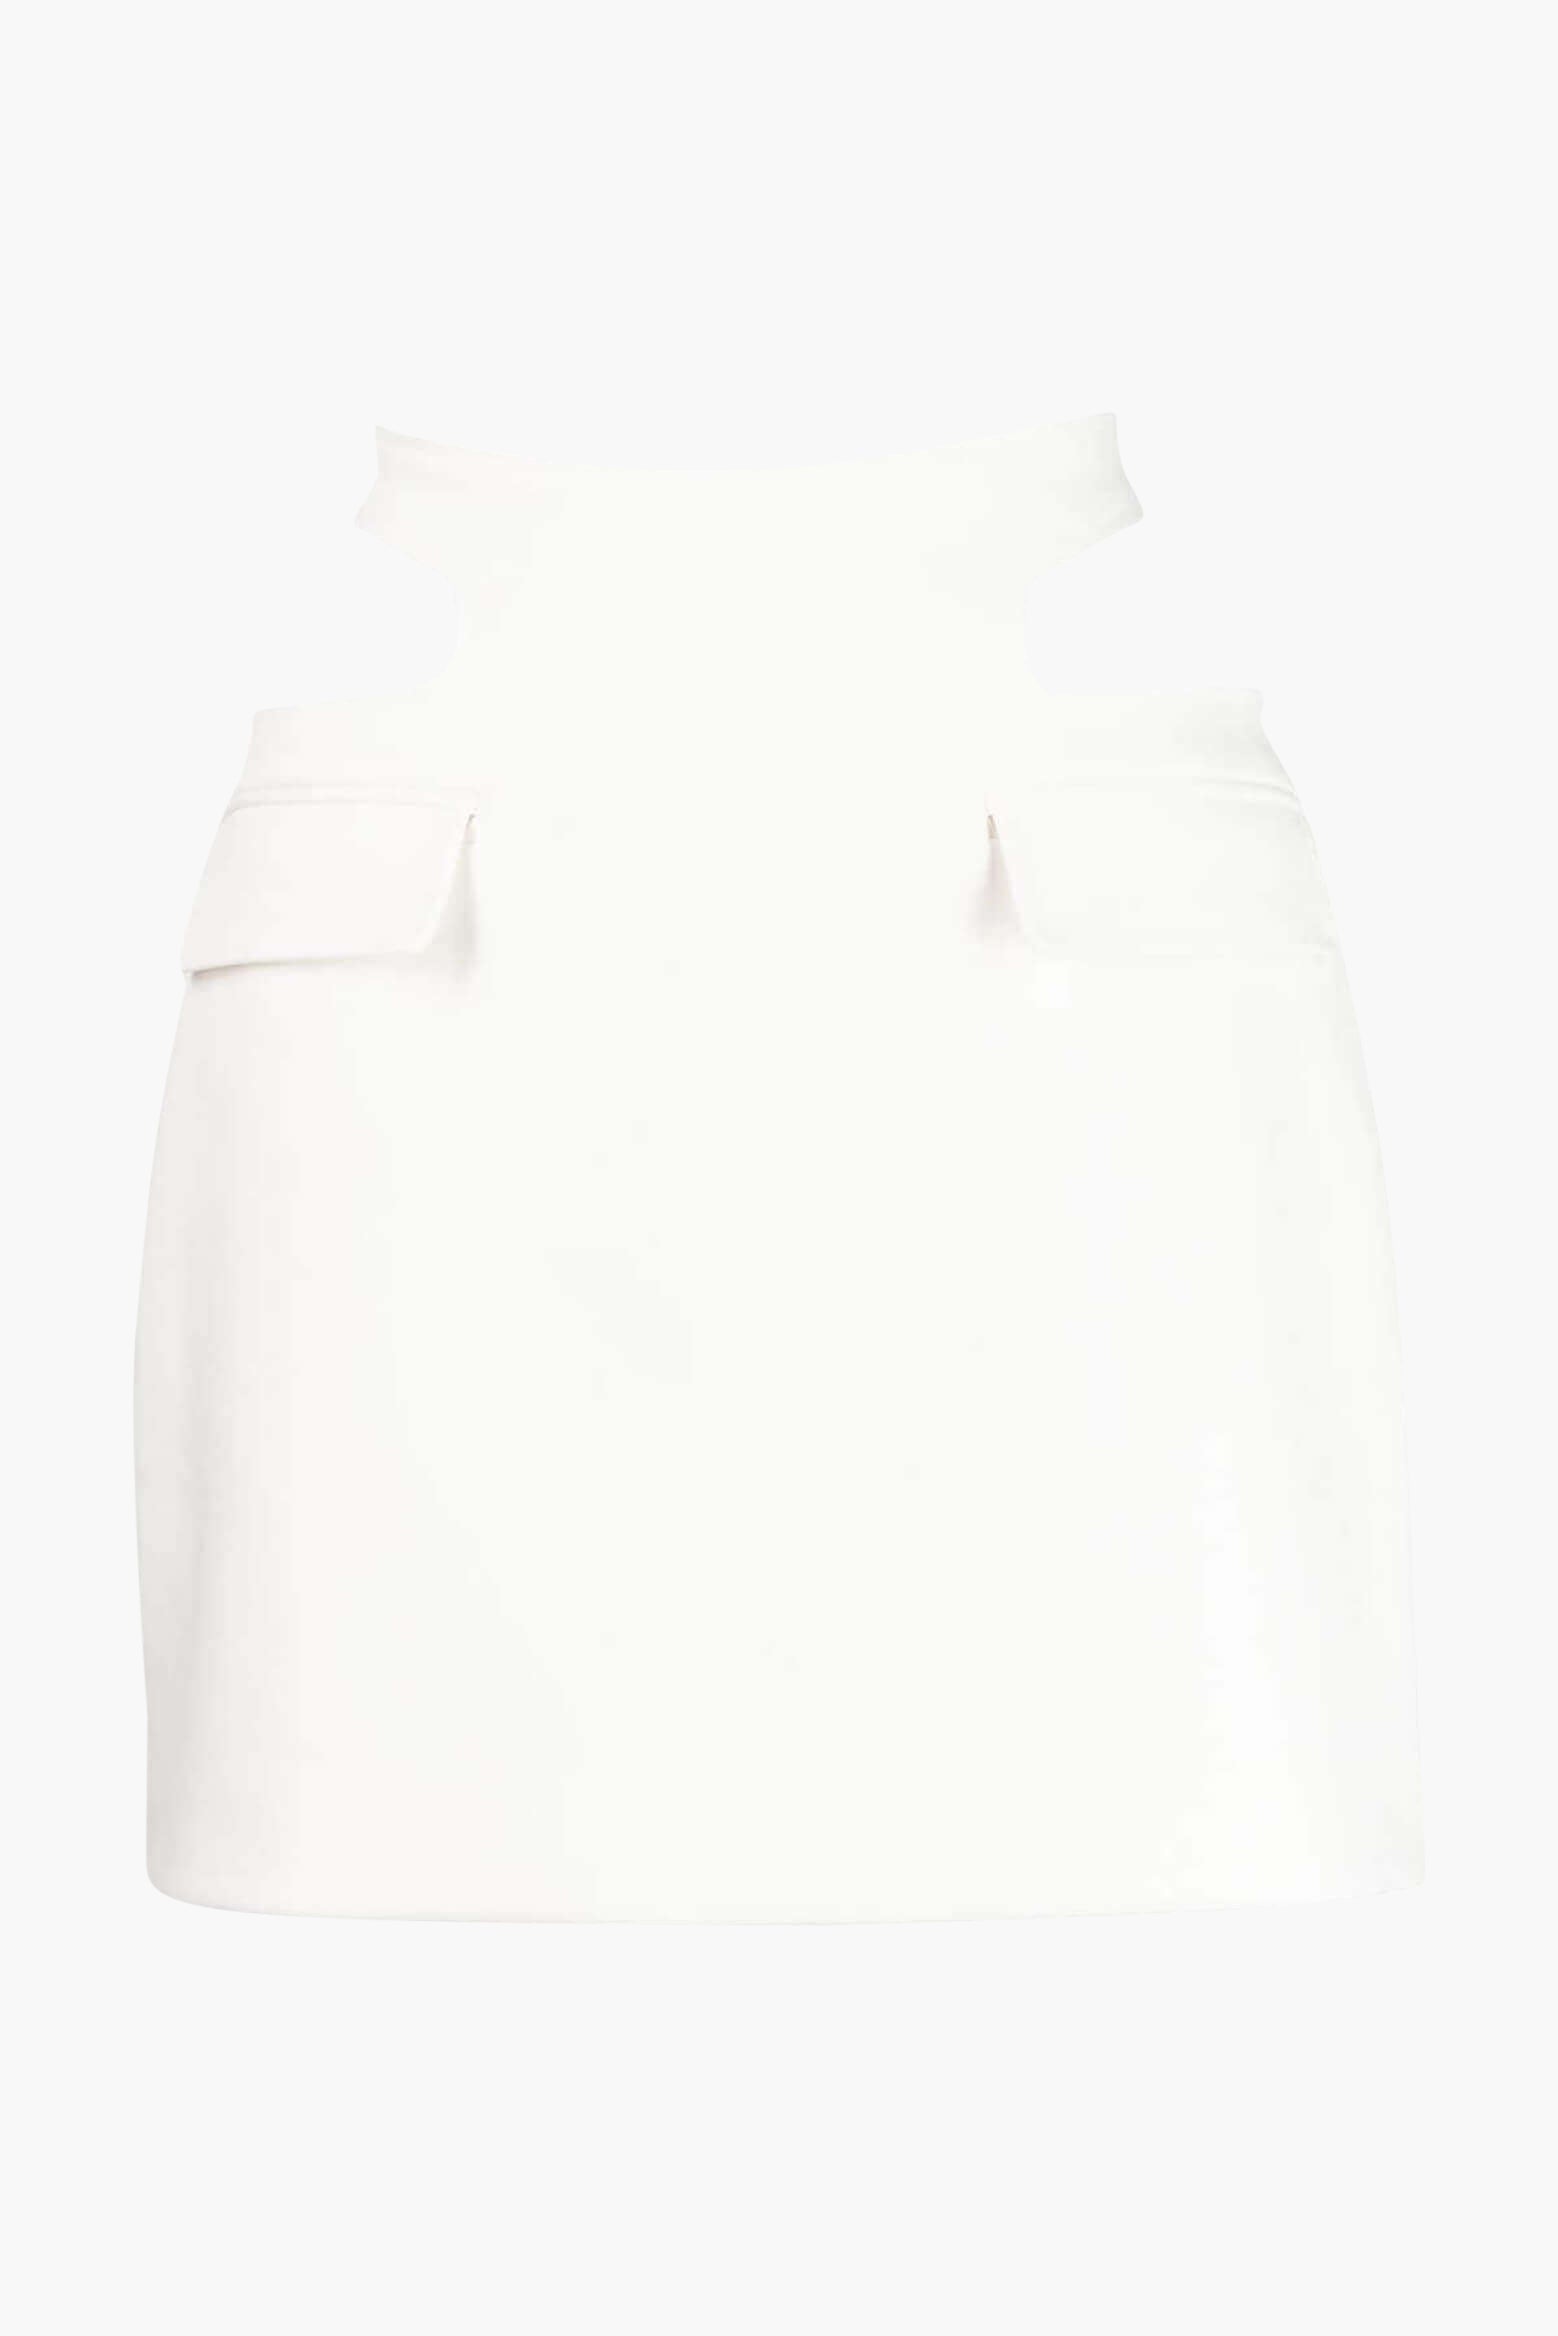 Dion Lee Y-Front Buckle Skirt in Ivory available at The New Trend